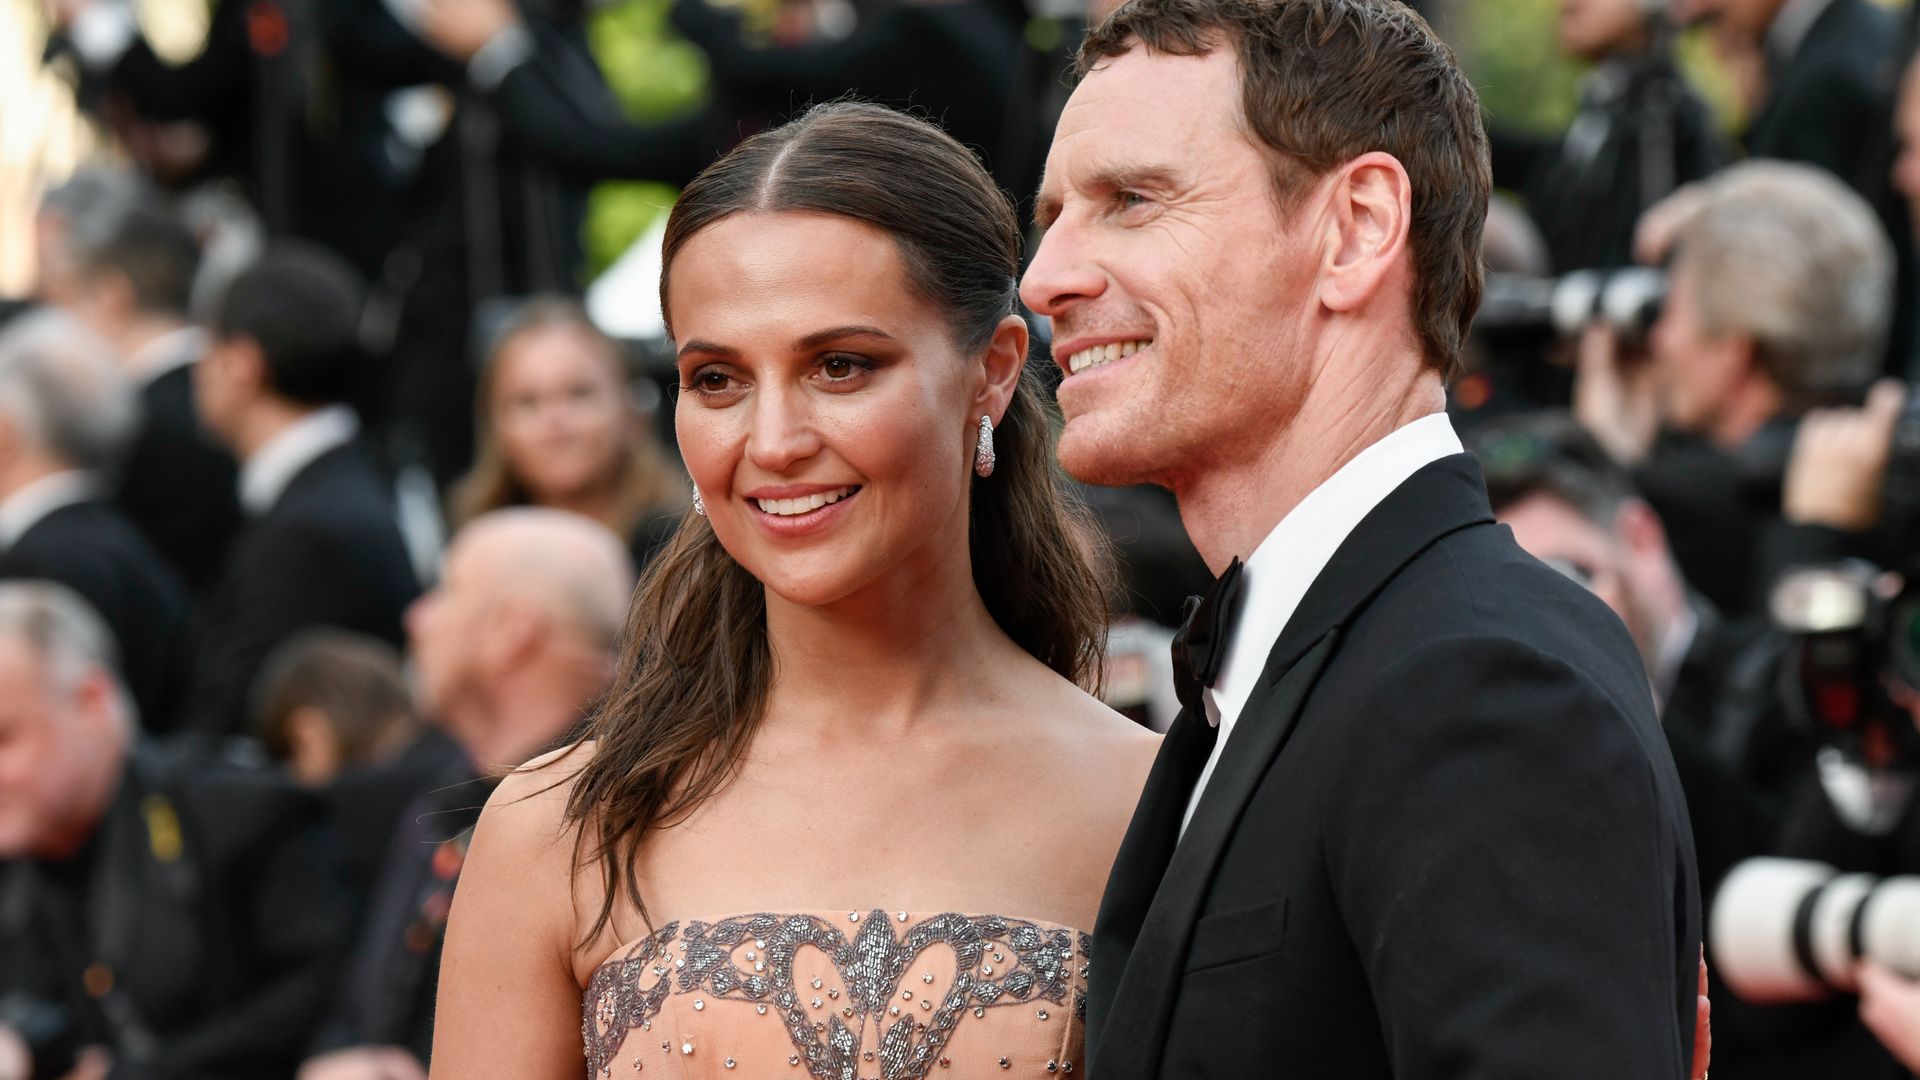 Michael Fassbender and Alicia Vikander's rare joint appearance leaves fans reeling